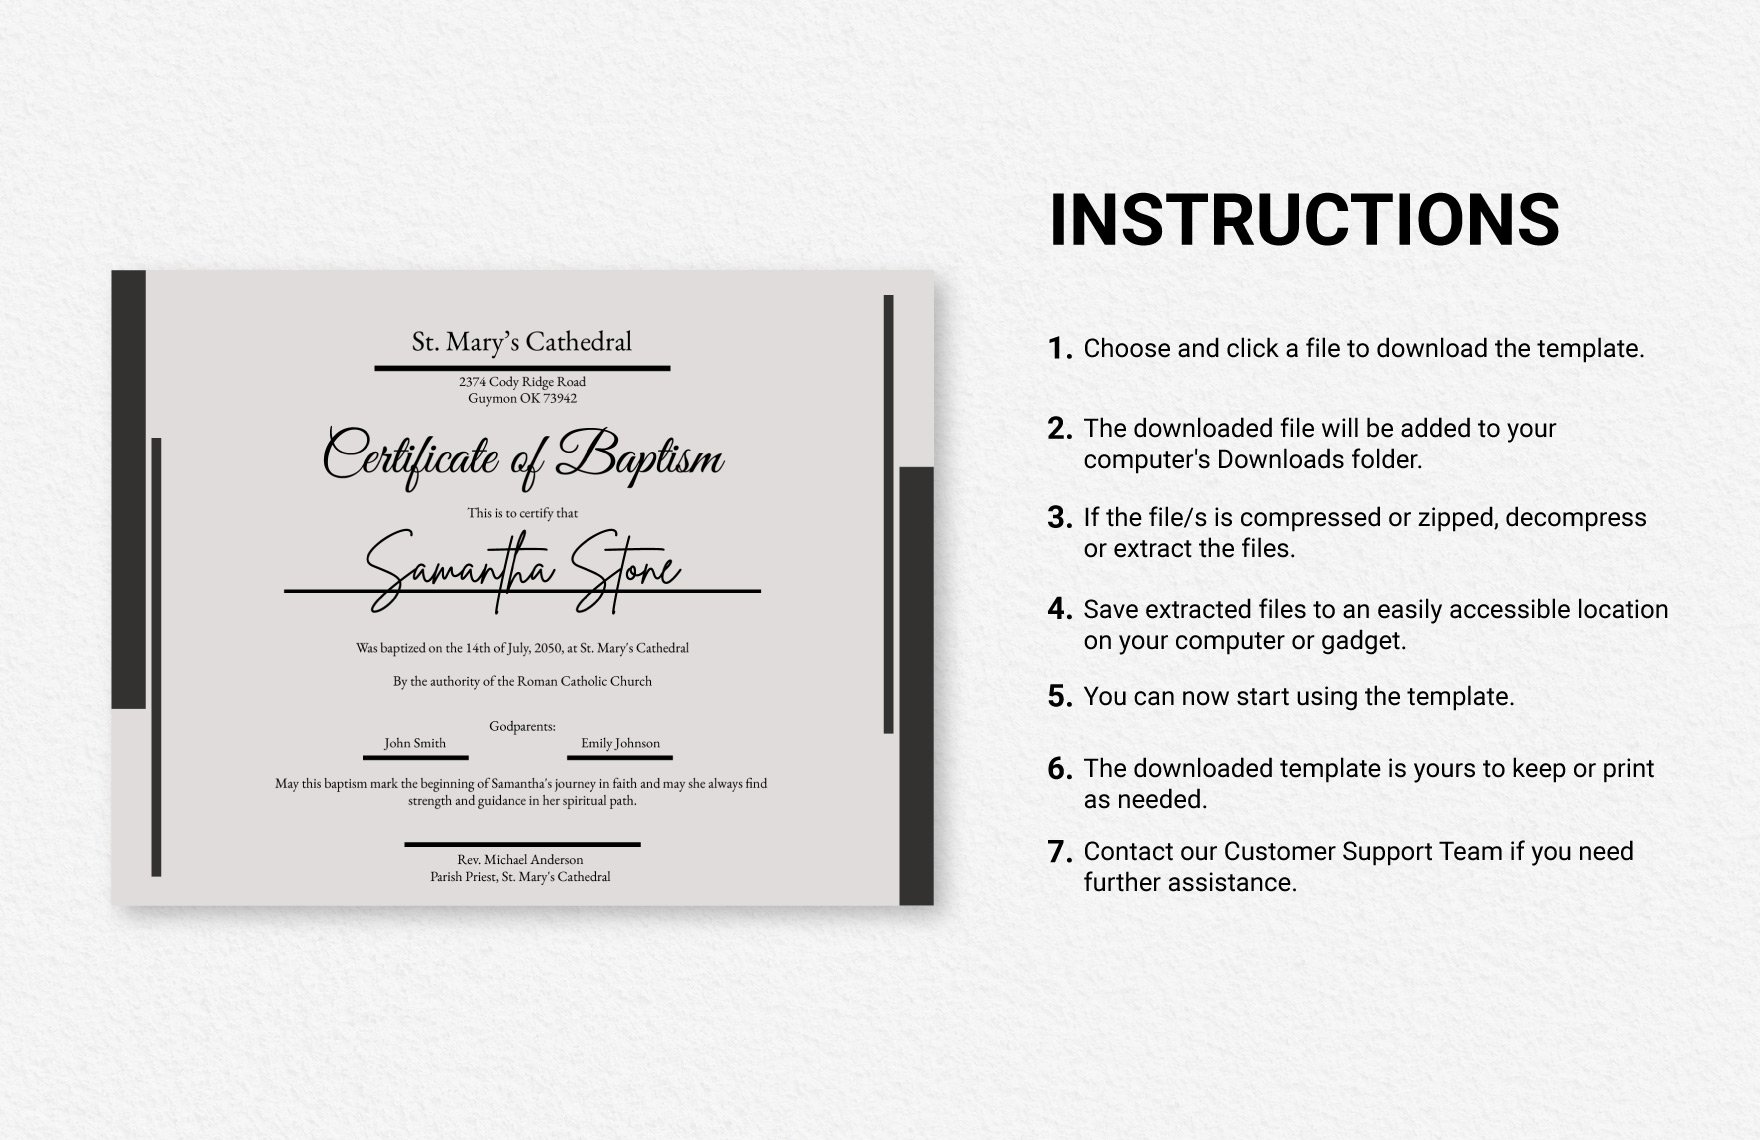 Certificate of Baptism Template